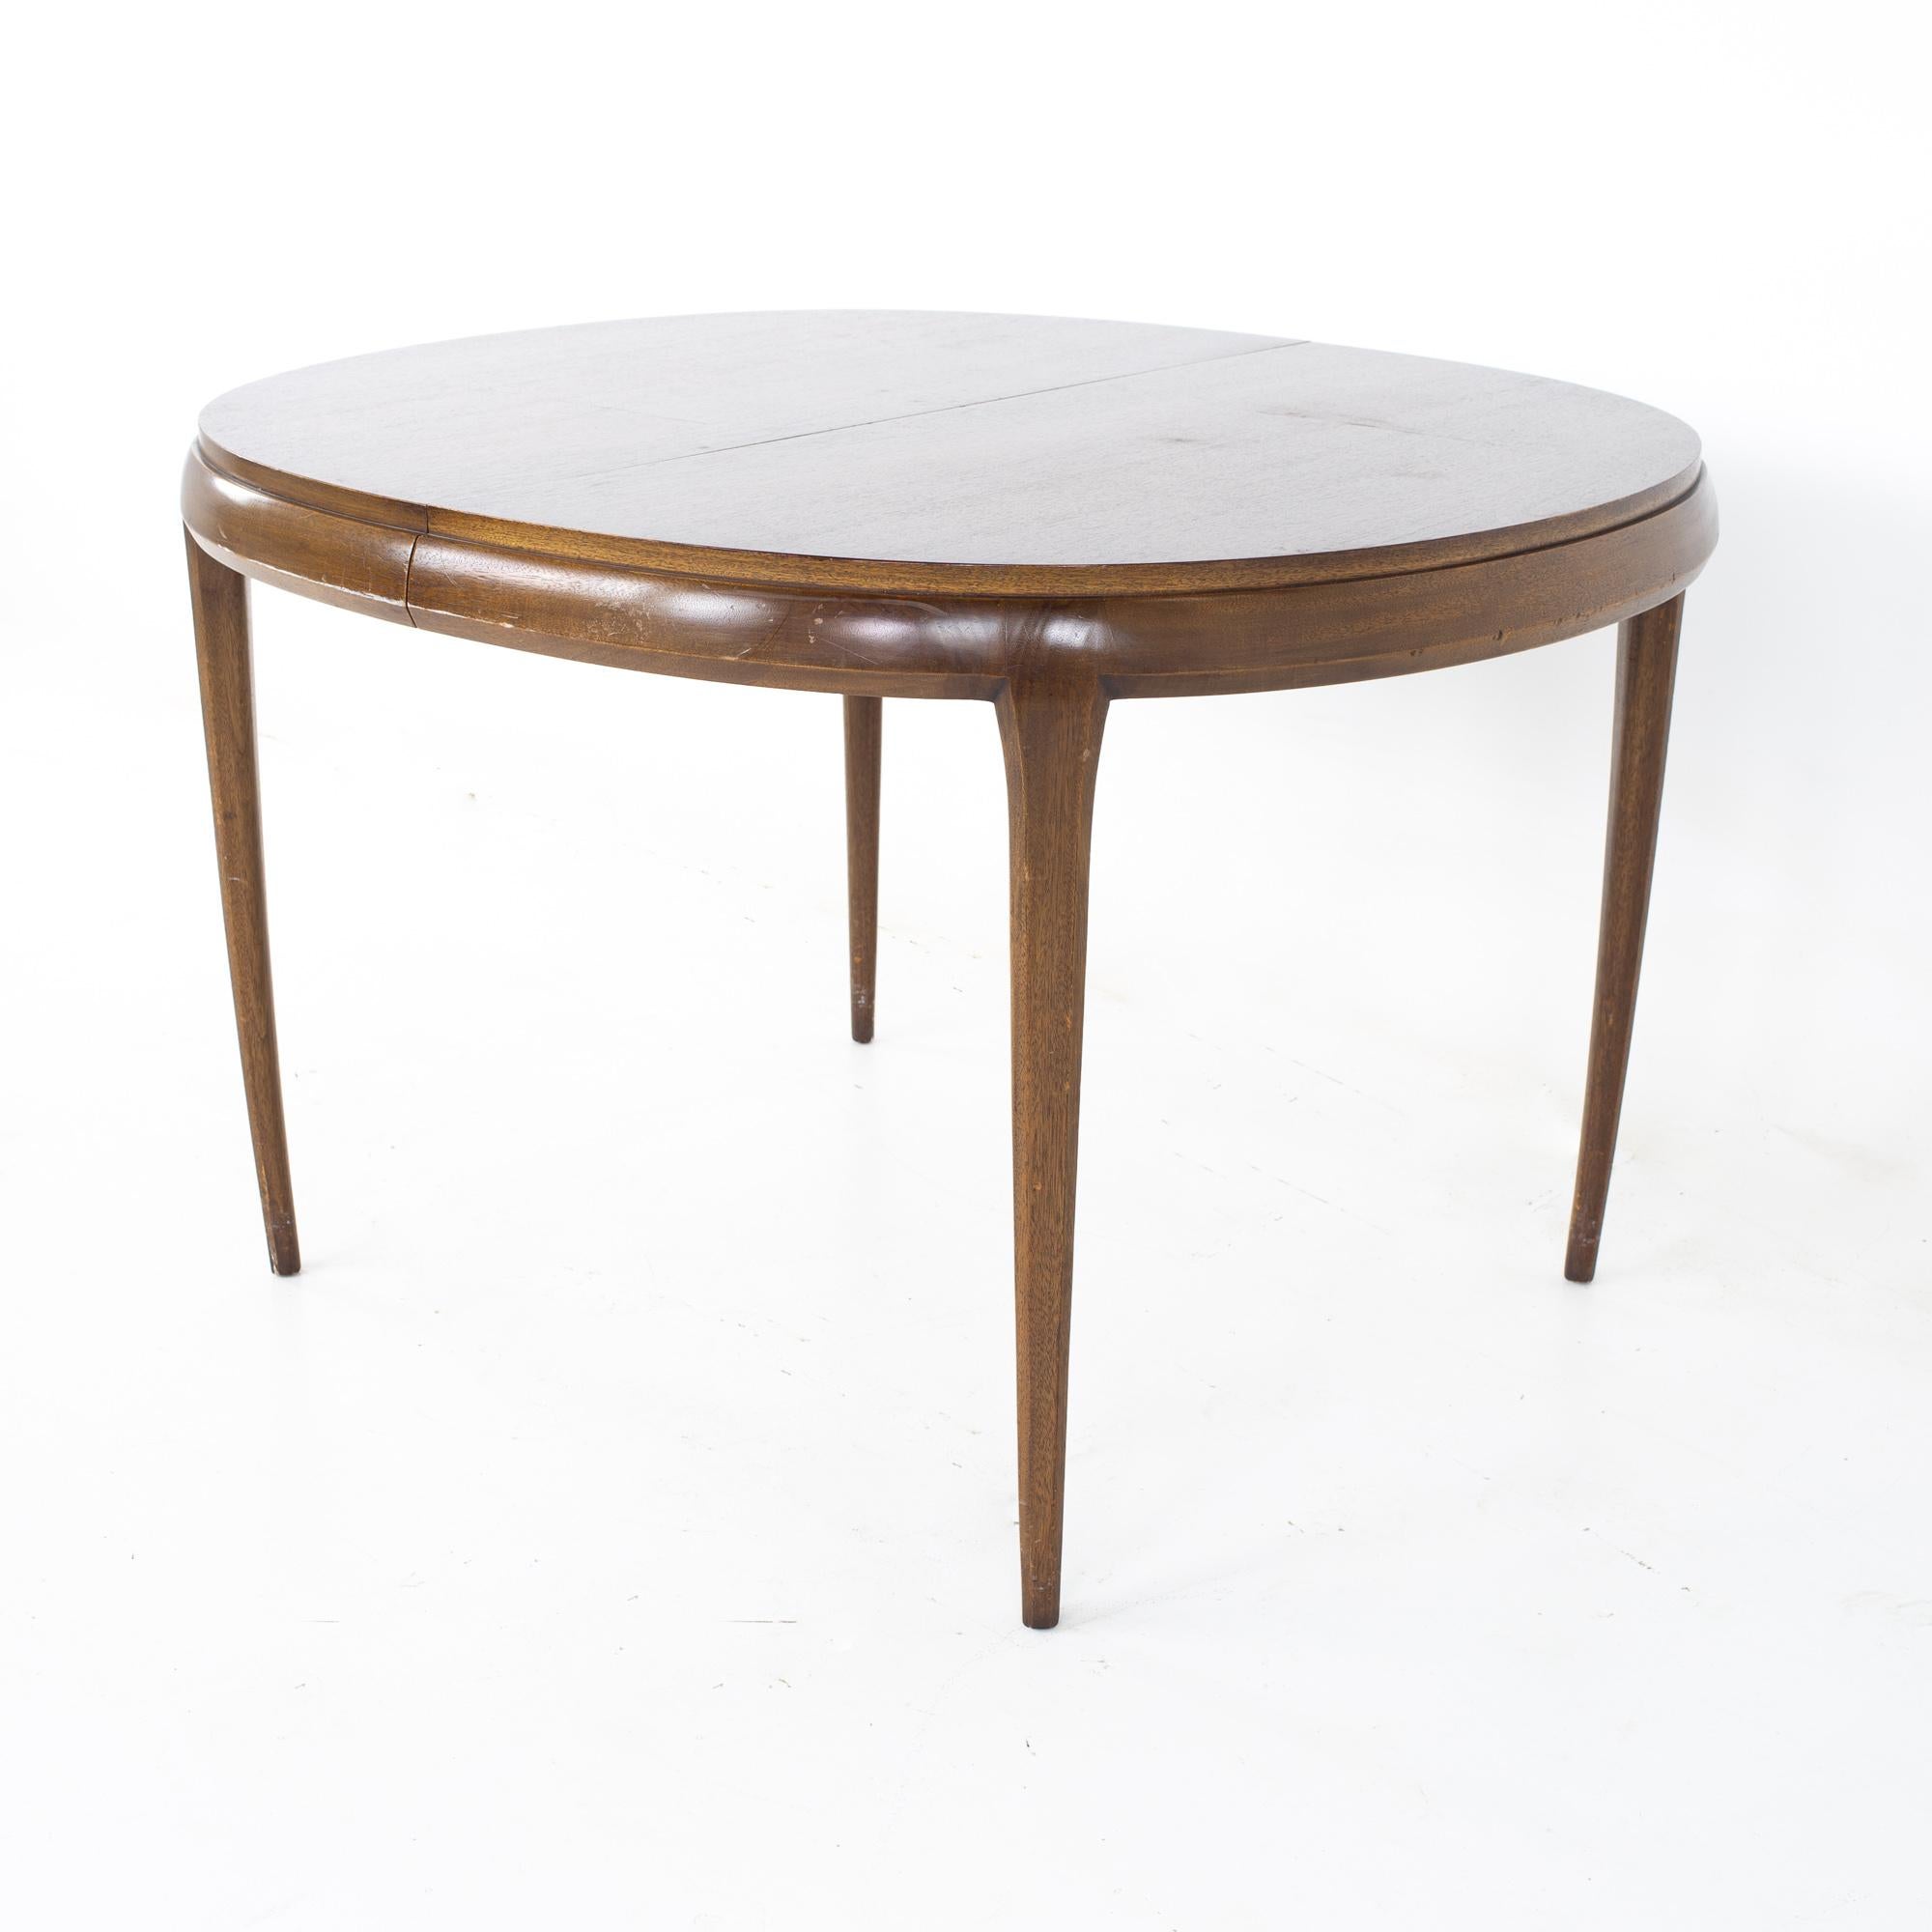 Lane Rhythm style Mid Century walnut round oval expanding dining table
Table measures: 46 wide x 42 deep x 29.5 inches high, each leaf is 18 inches wide, making a maximum table width of 100 inches when all three leaves are used.  This table has a